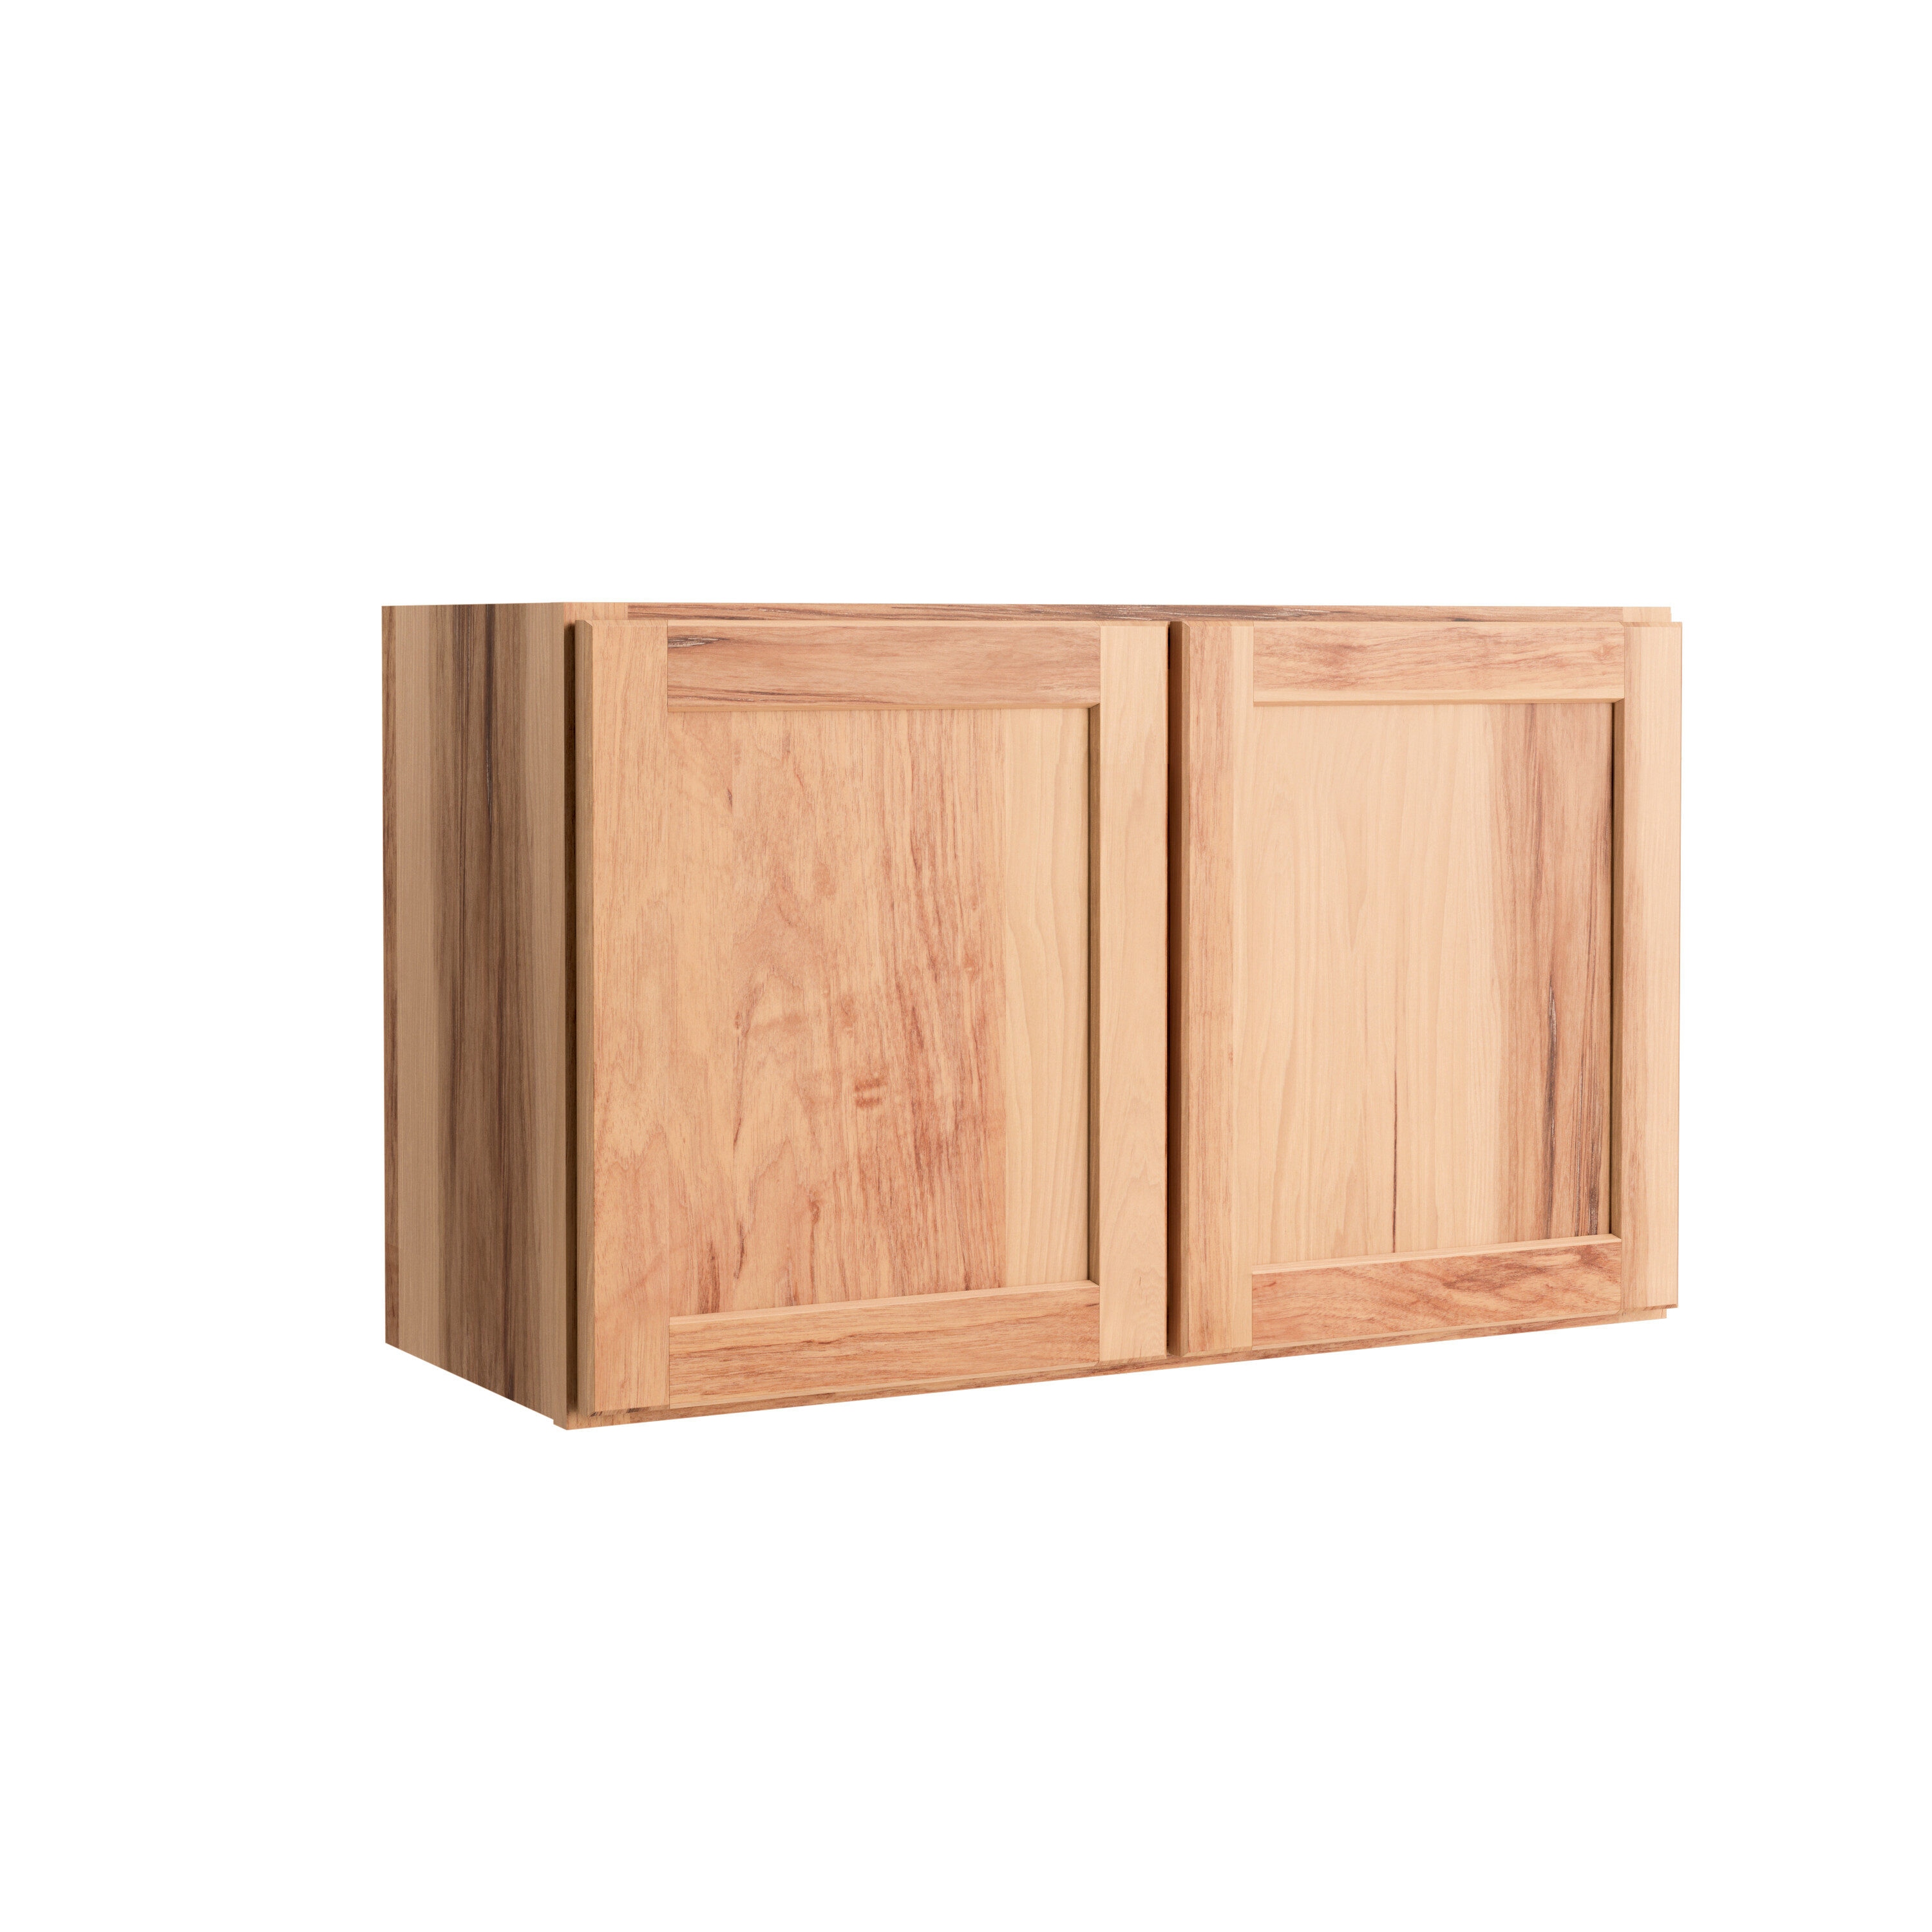 Branson Kitchen Cabinets at Lowes.com